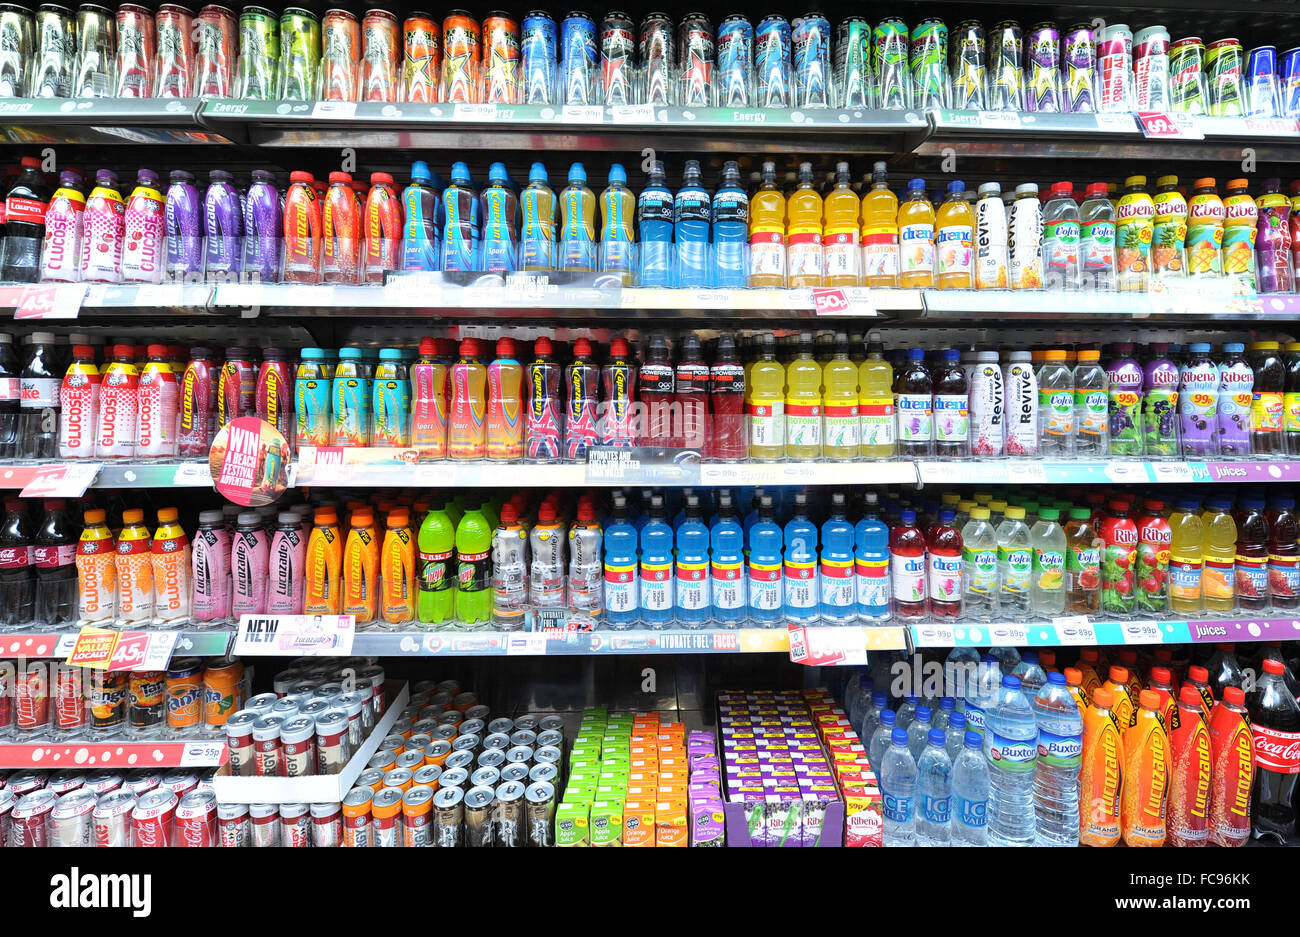 Fizzy carbonated soft drinks for sale in a shop. Sugary fizzy drinks cause diabetes, tooth decay and heart disease. Stock Photo